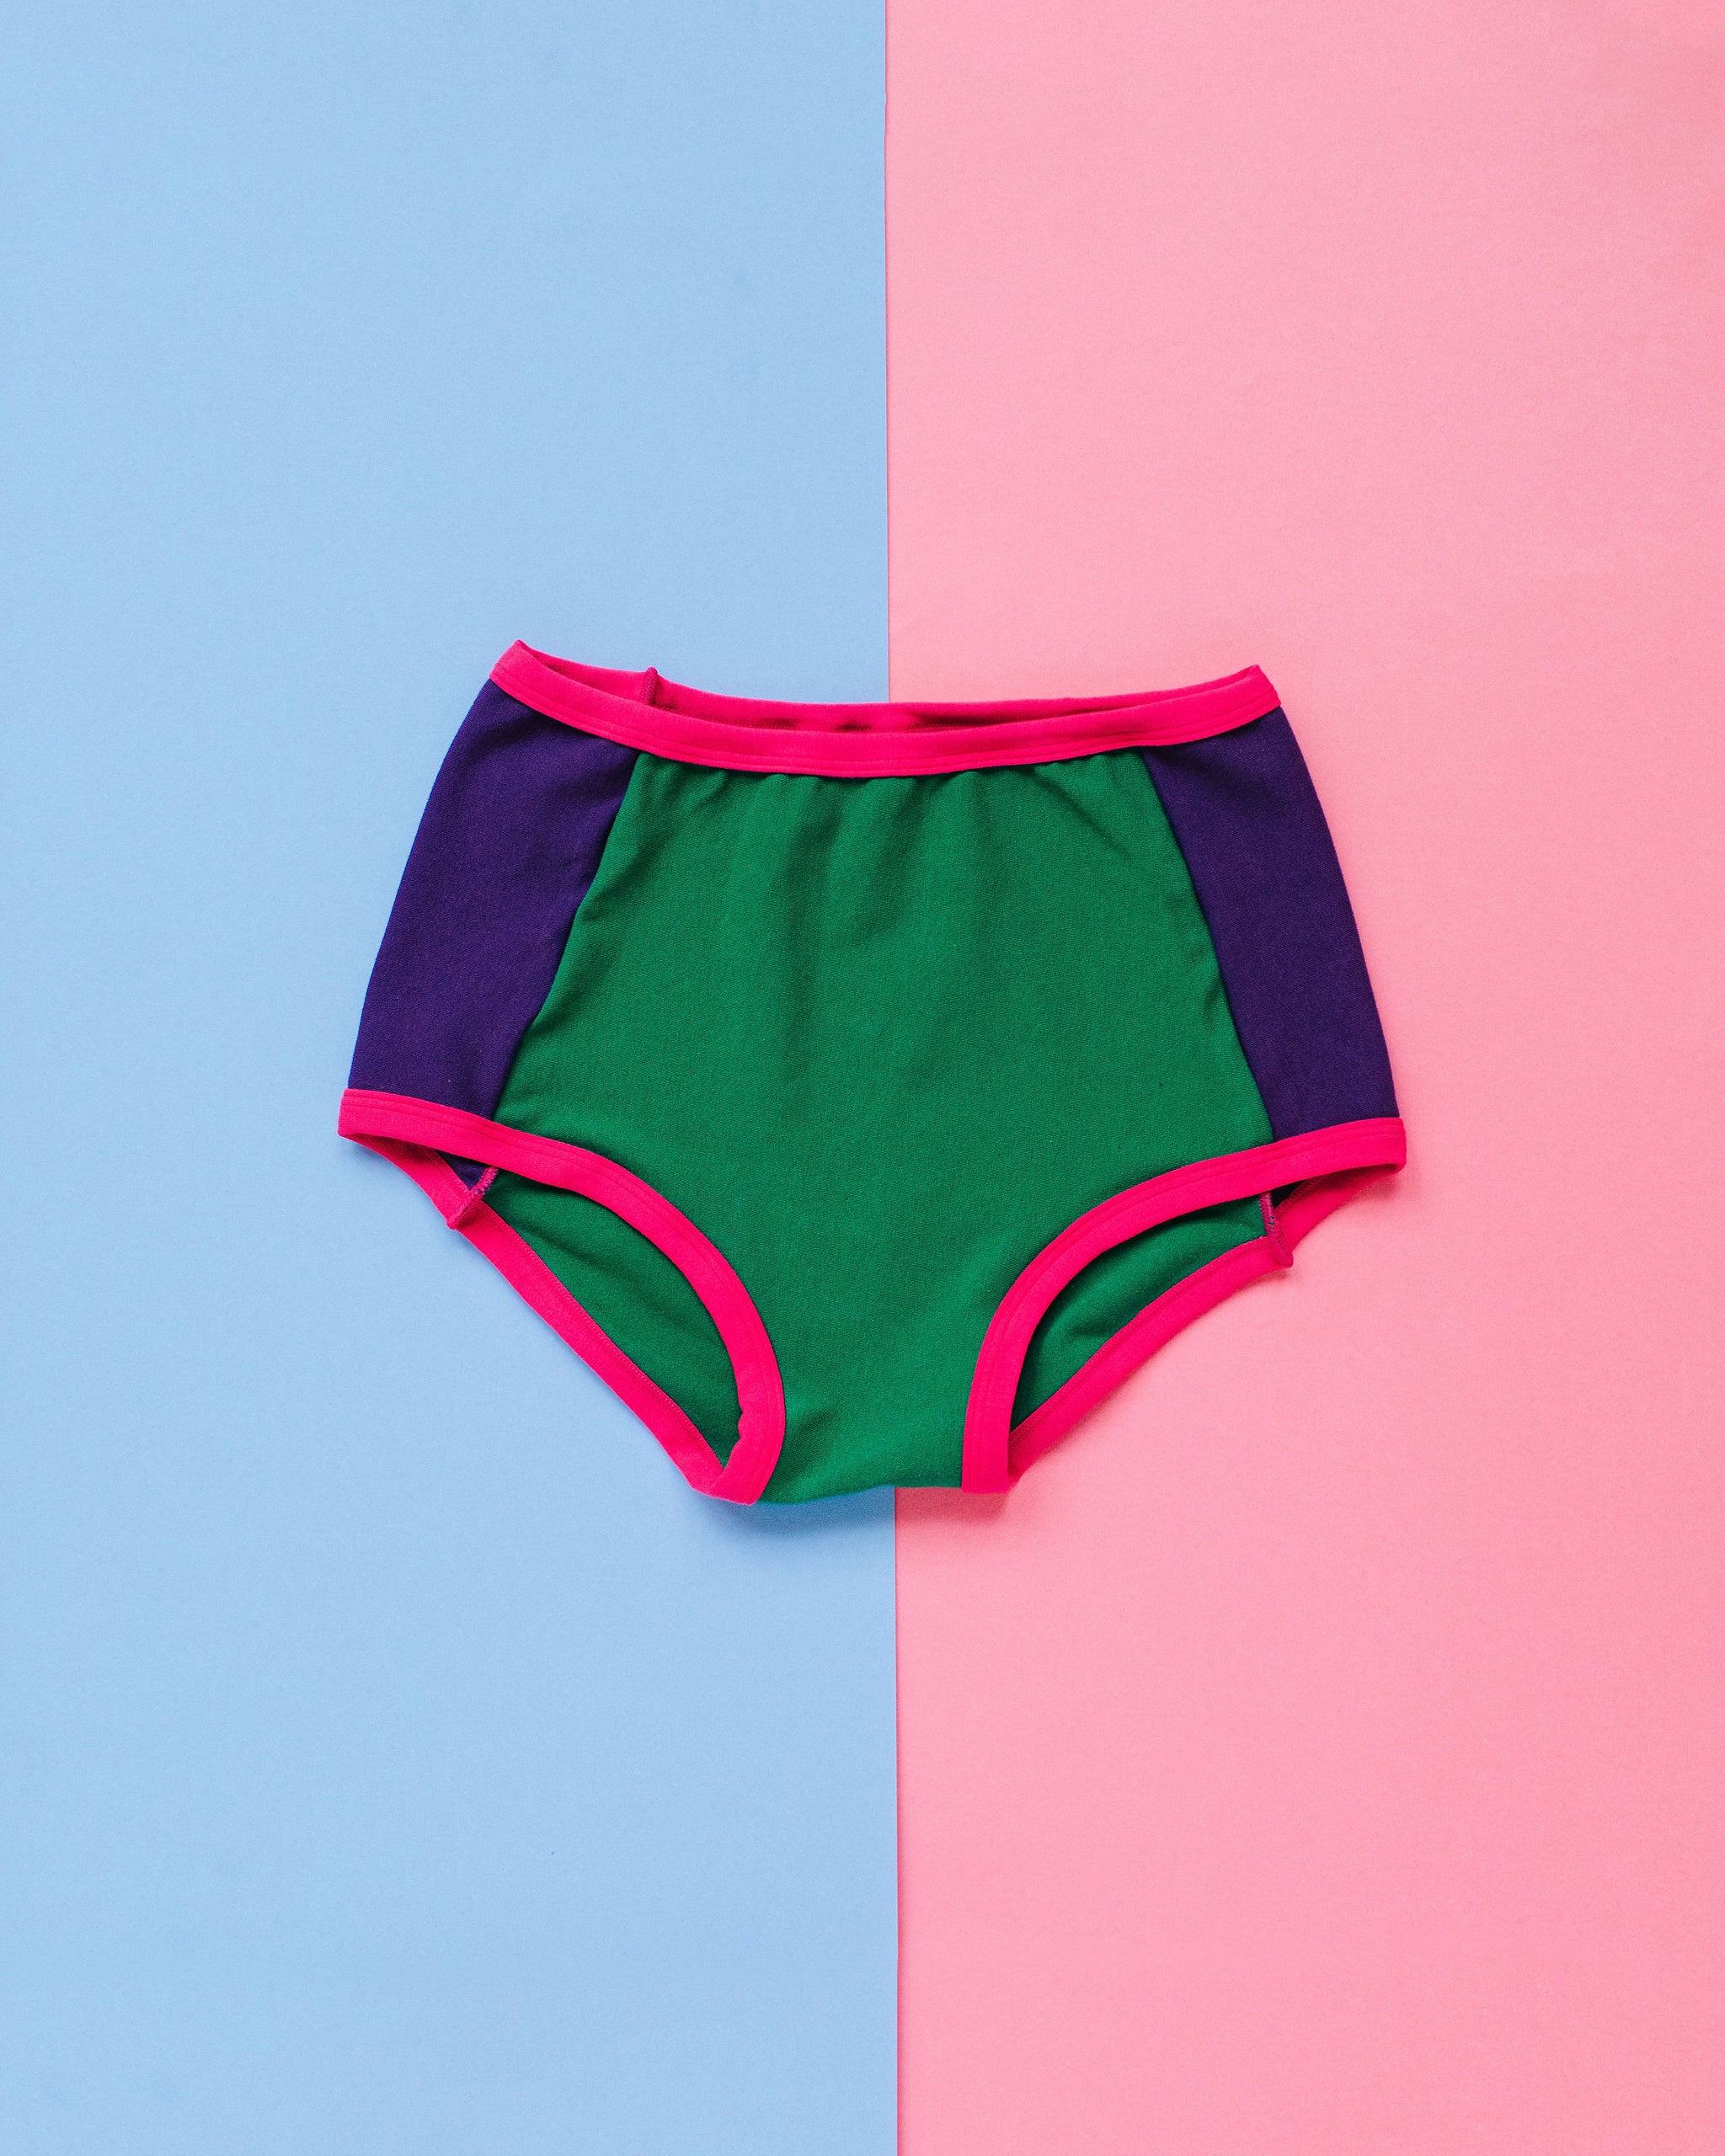 Flat lay of Thunderpants Original Panel Pants style underwear in 90's Dream - purple sides, green middle, and pink binding.